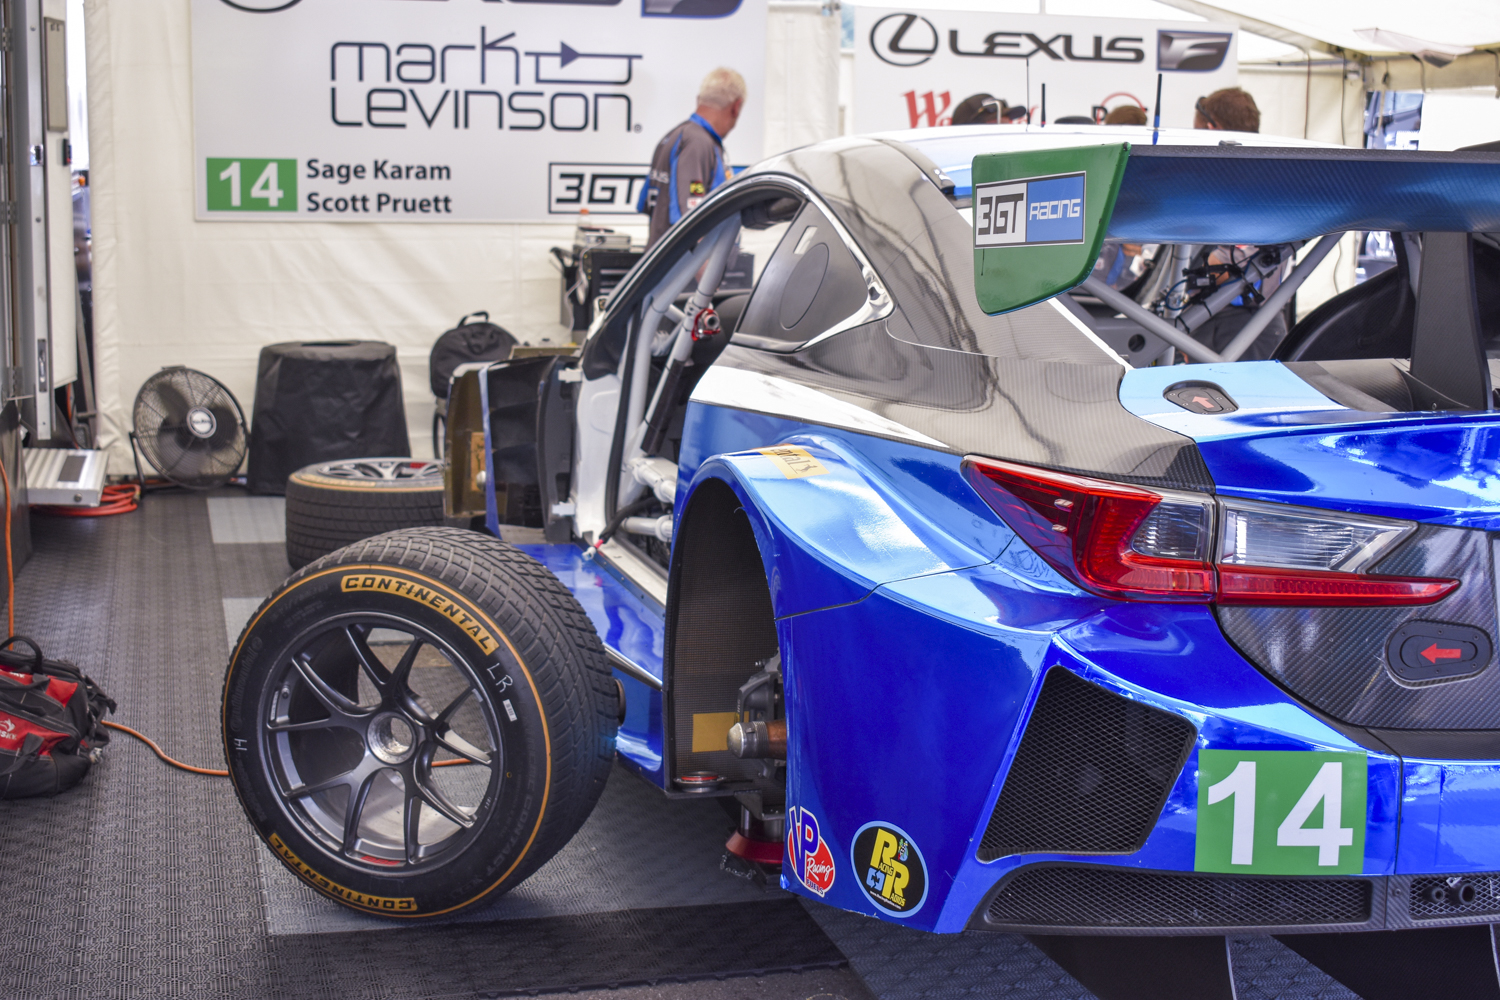 Wheel and front left of the Lexus RC F GT3